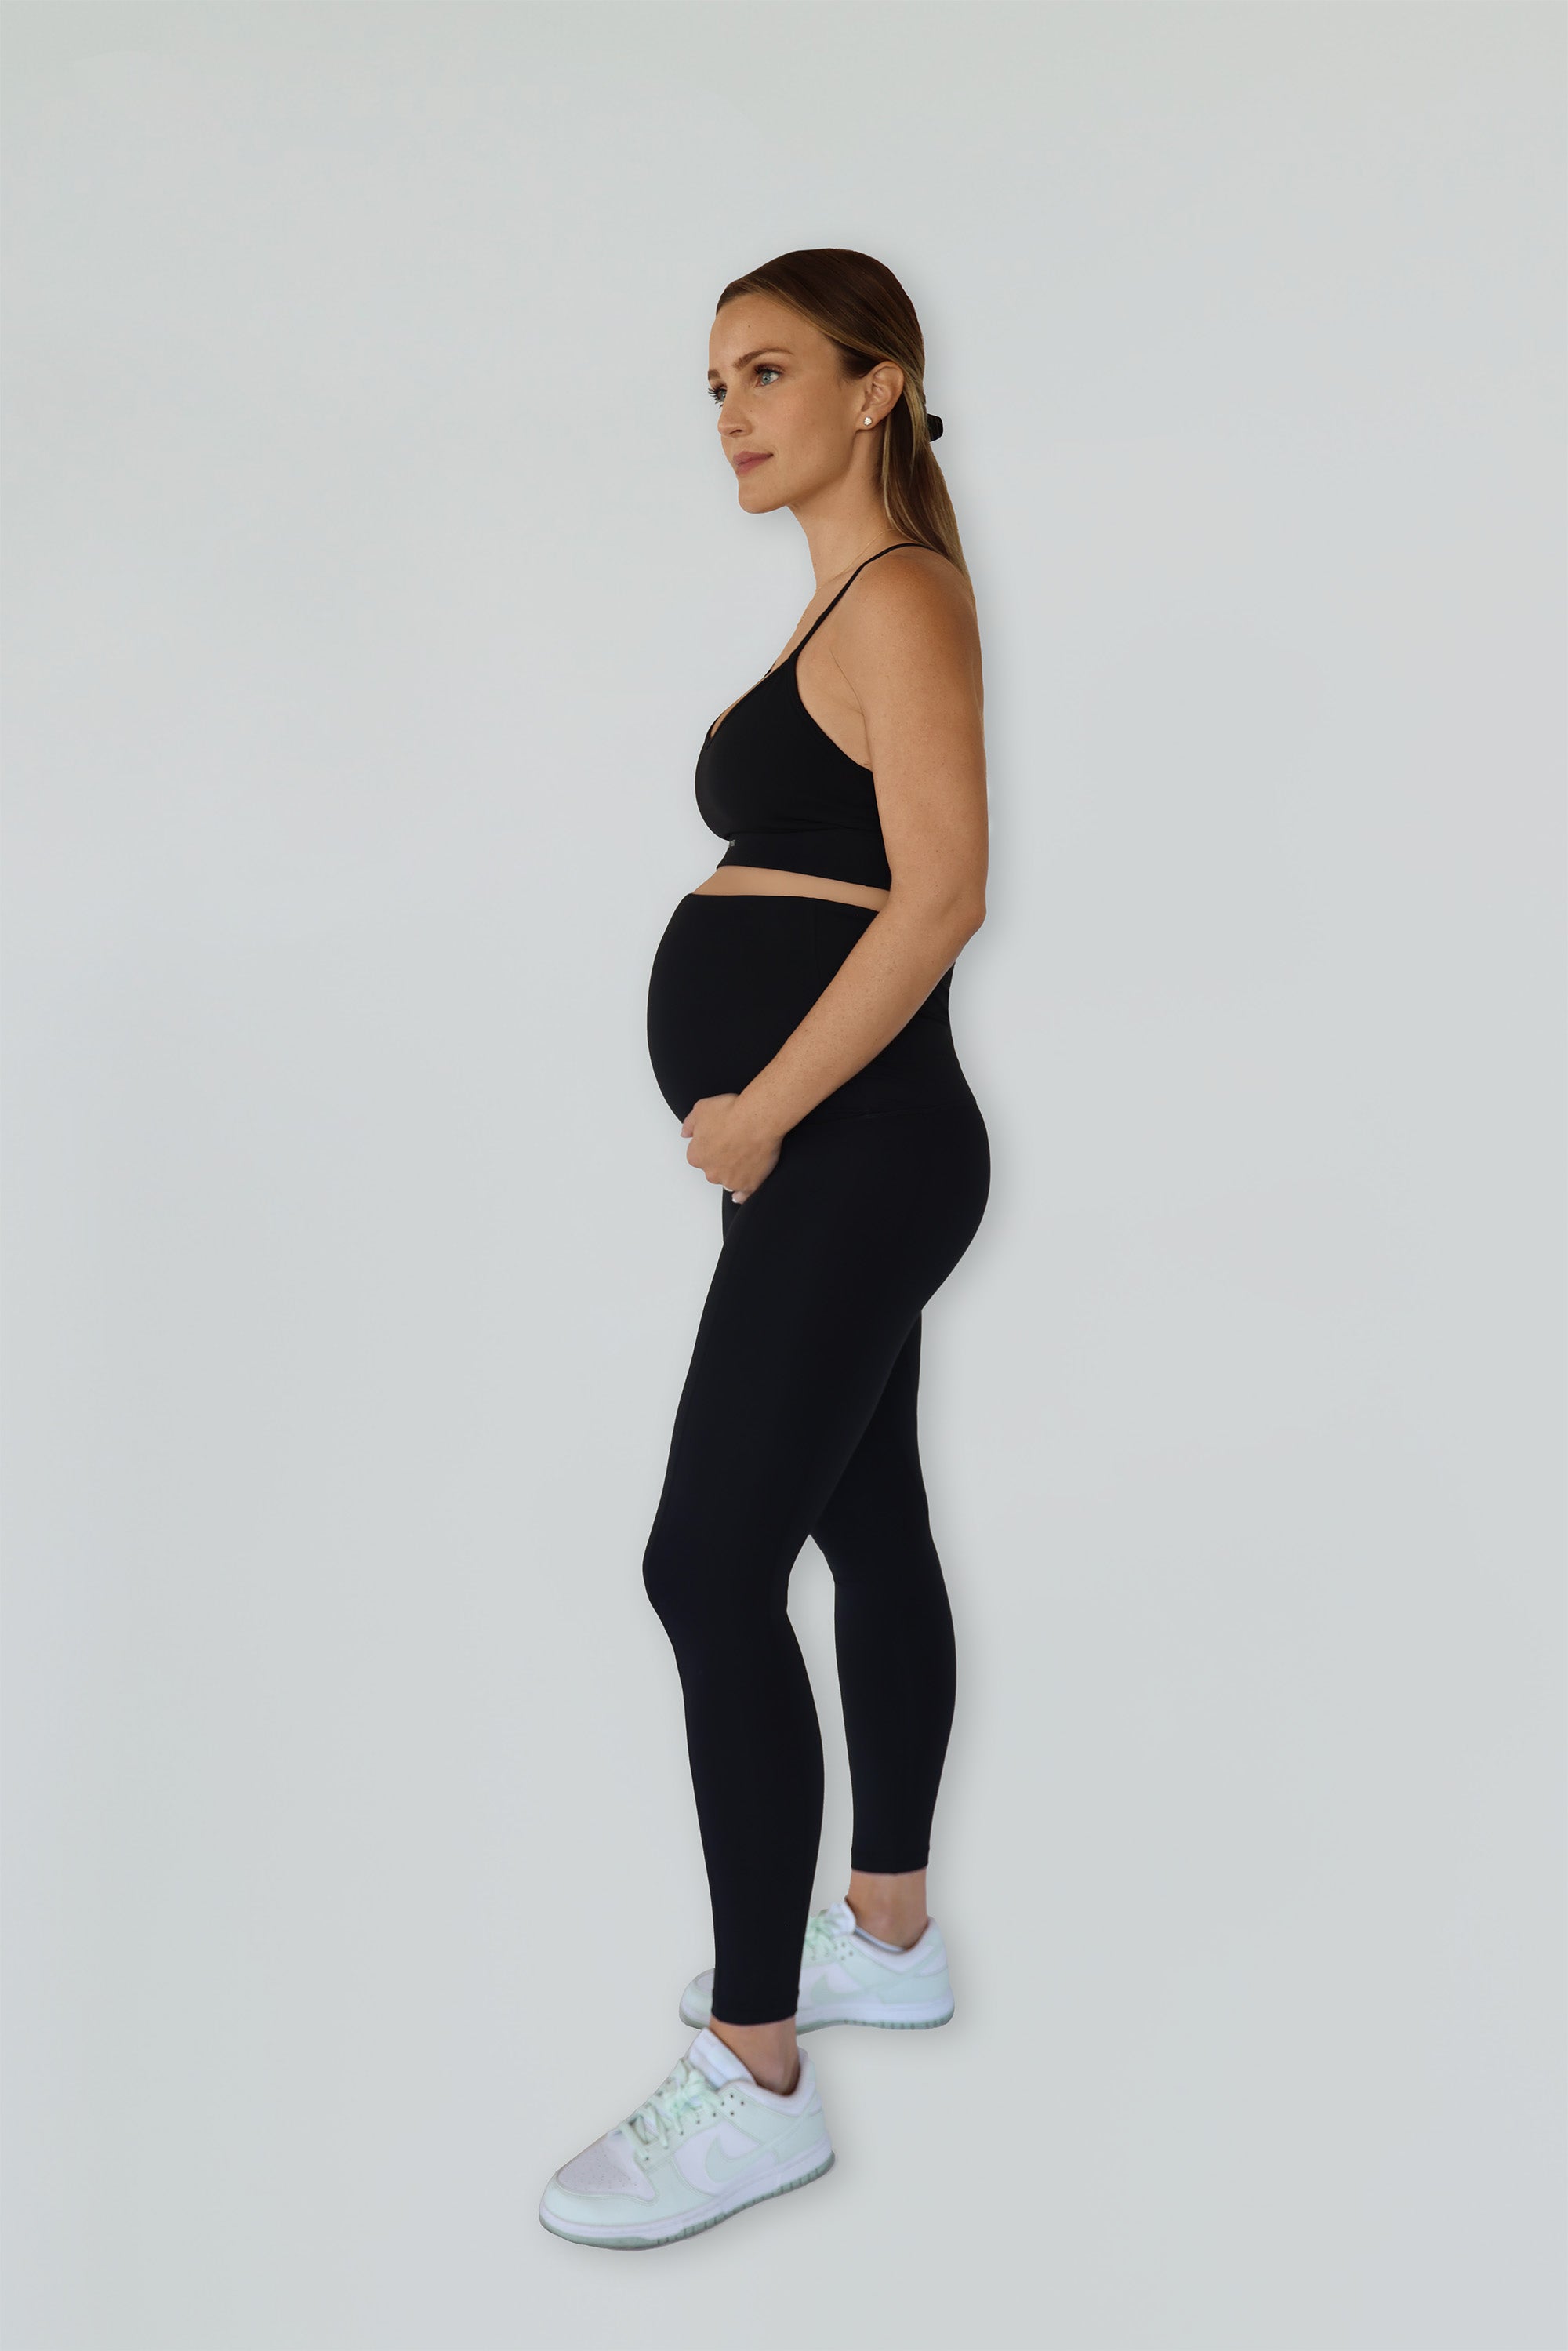 The Ultimate Guide to Choosing the Perfect Pair of Faux Leather Matern –  Preggo Leggings